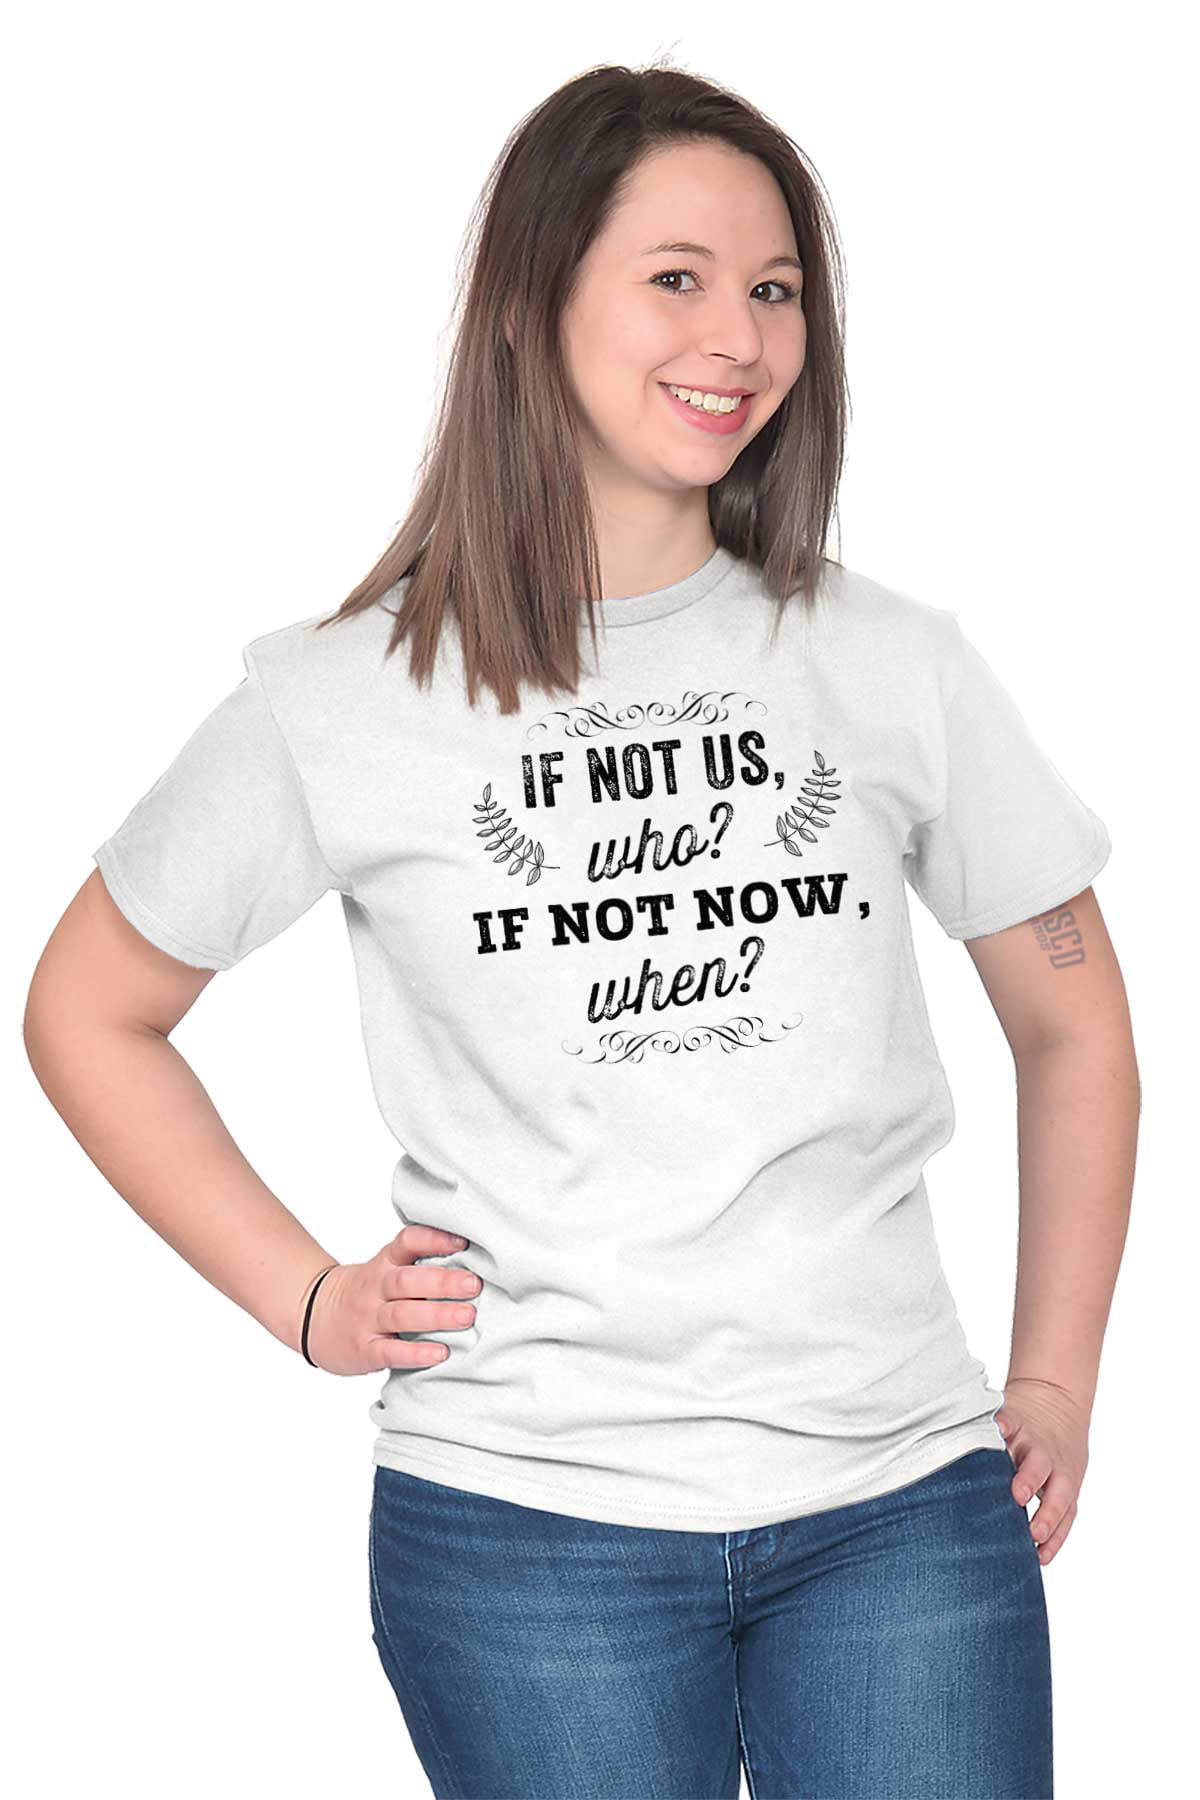 Inspirational Ladies TShirts Tees T For Women If Not Now When Inspiring ...